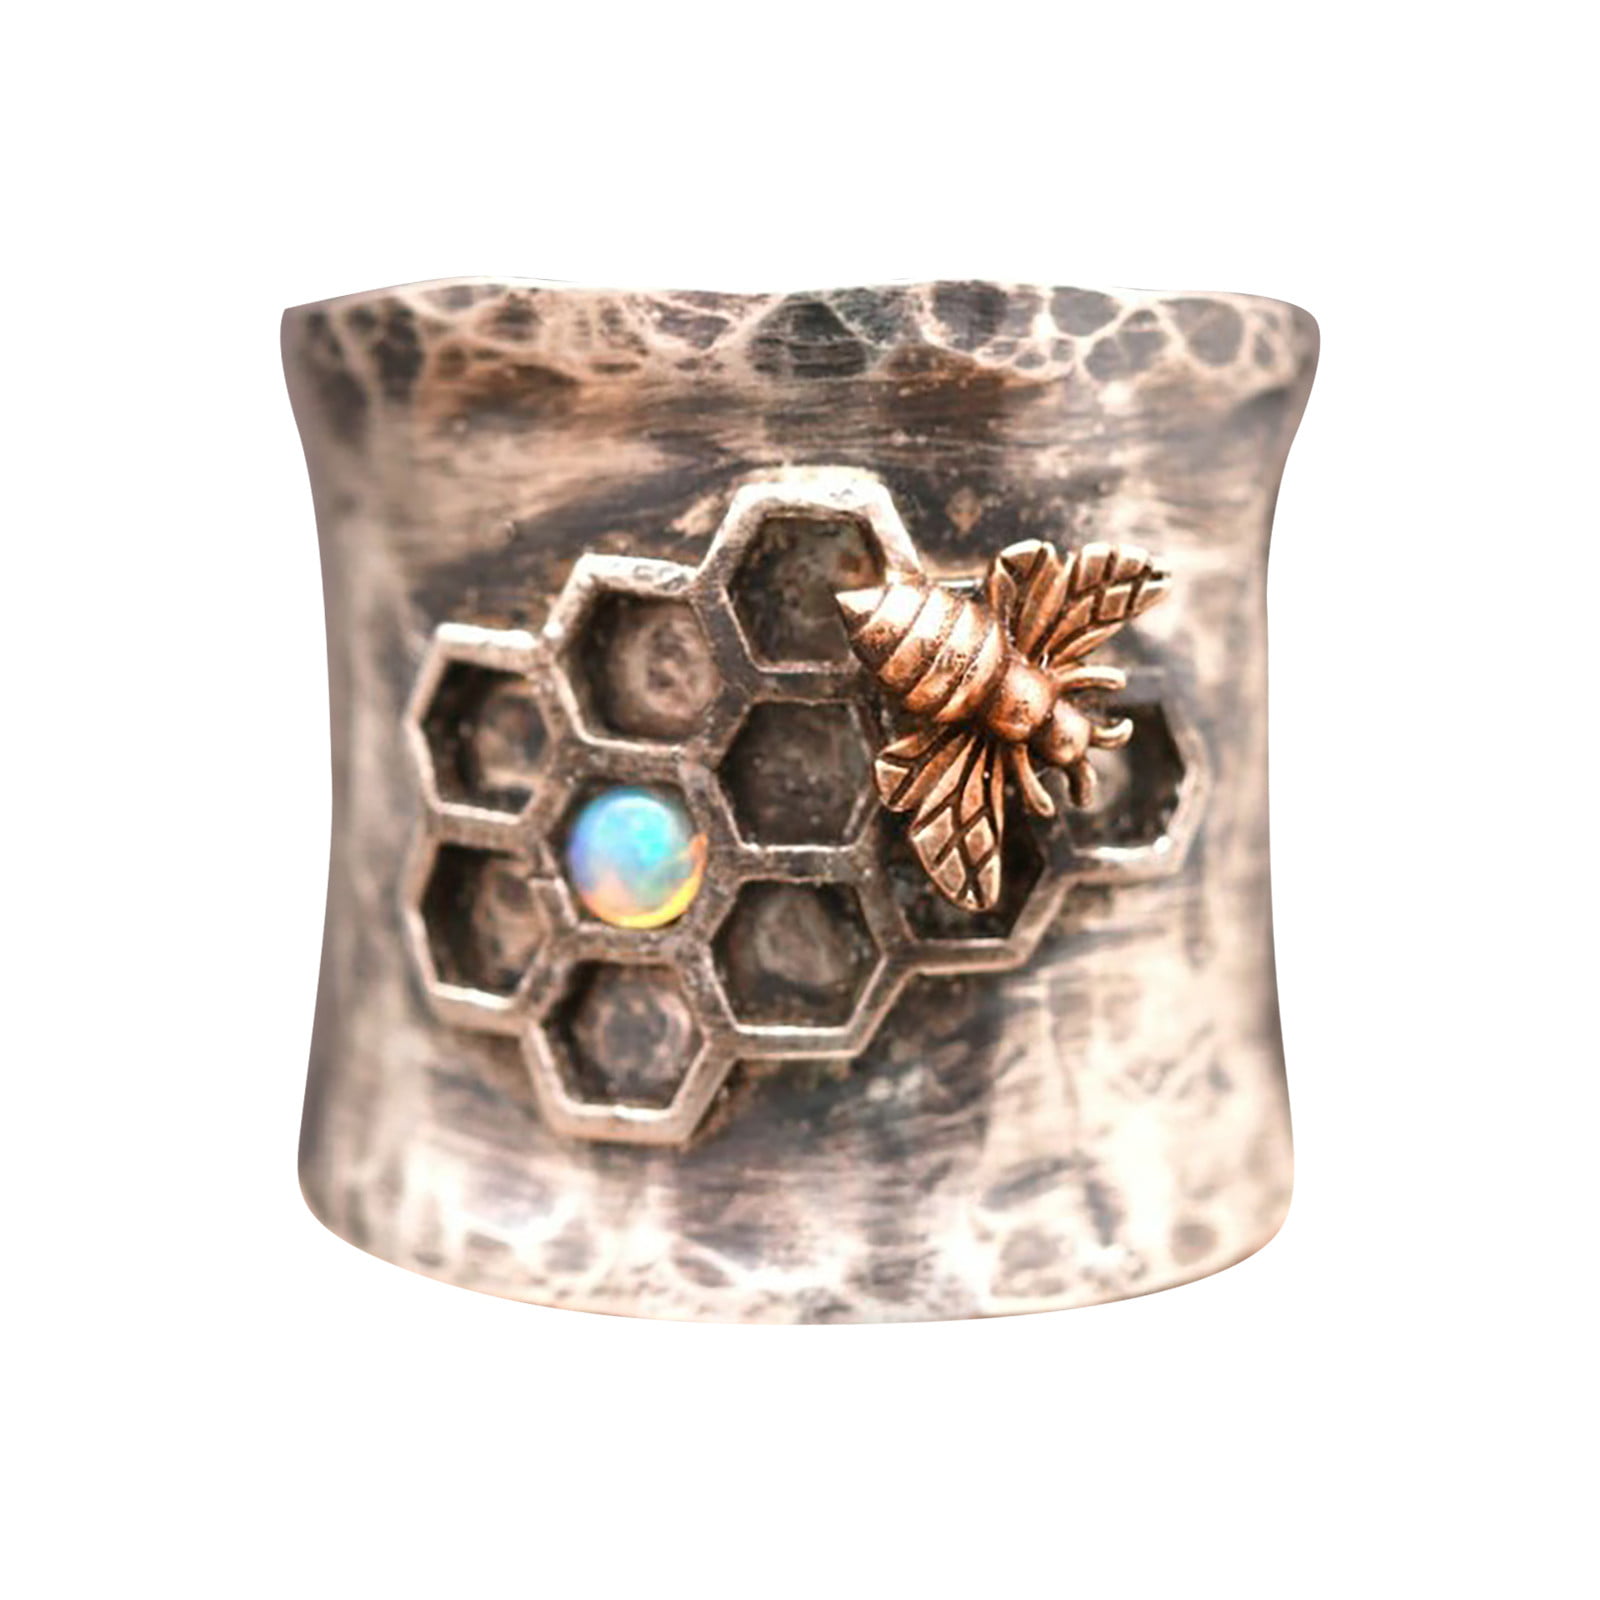 Metalsmithing Rustic Flame Colored Hand Cut and Textured Copper Flower Ring with Silver Accent Wide Band Size 7 Ring